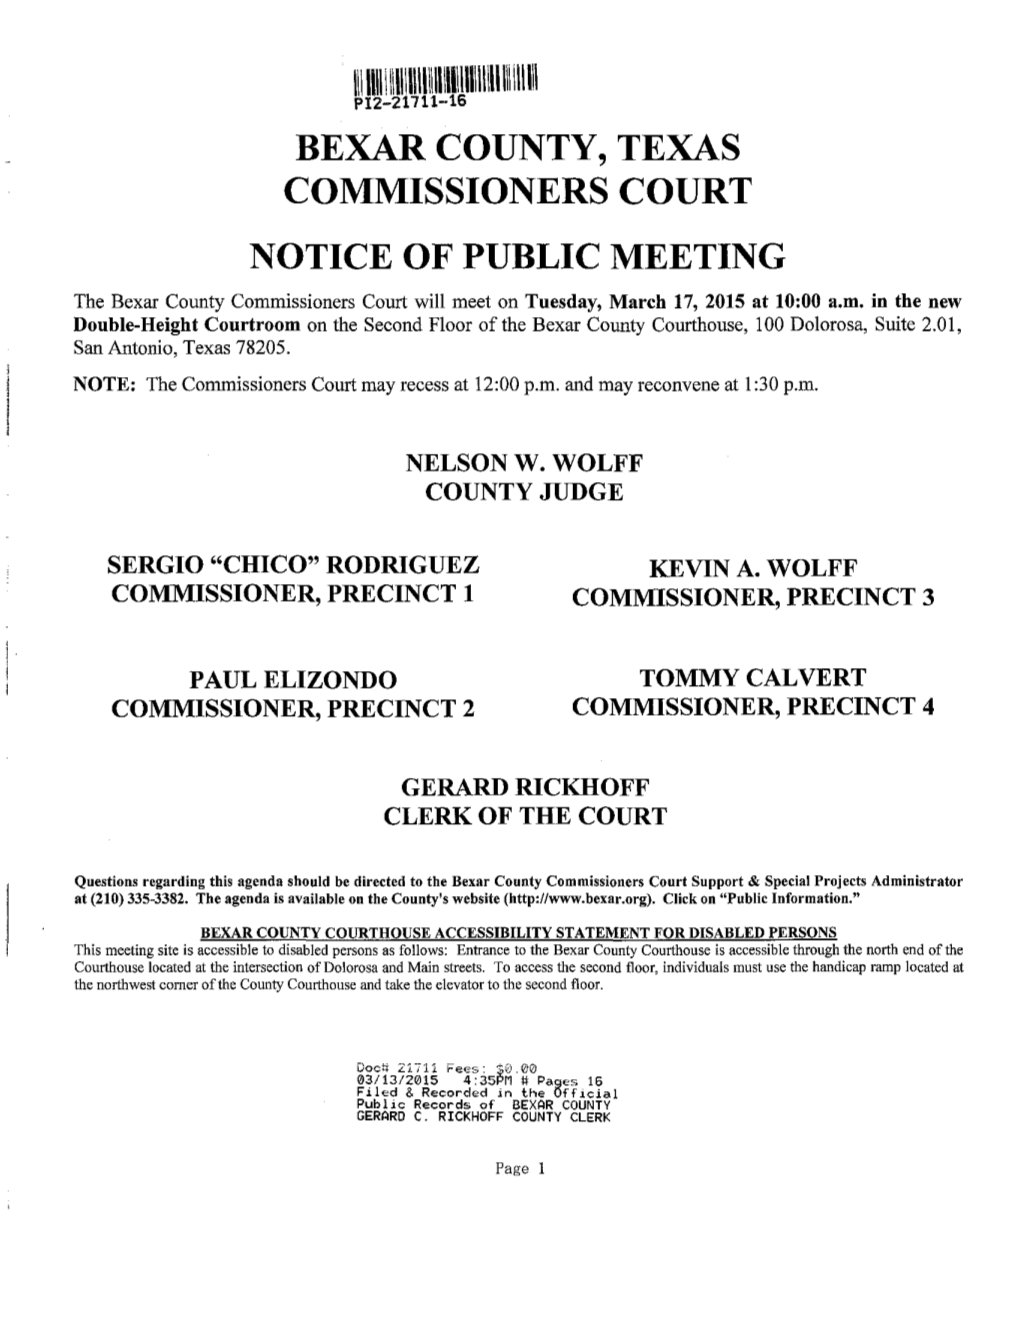 BEXAR COUNTY, TEXAS COMMISSIONERS COURT NOTICE of PUBLIC MEETING the Bexar County Commissioners Court Will Meet on Tuesday, March 17, 2015 at 10:00 A.M